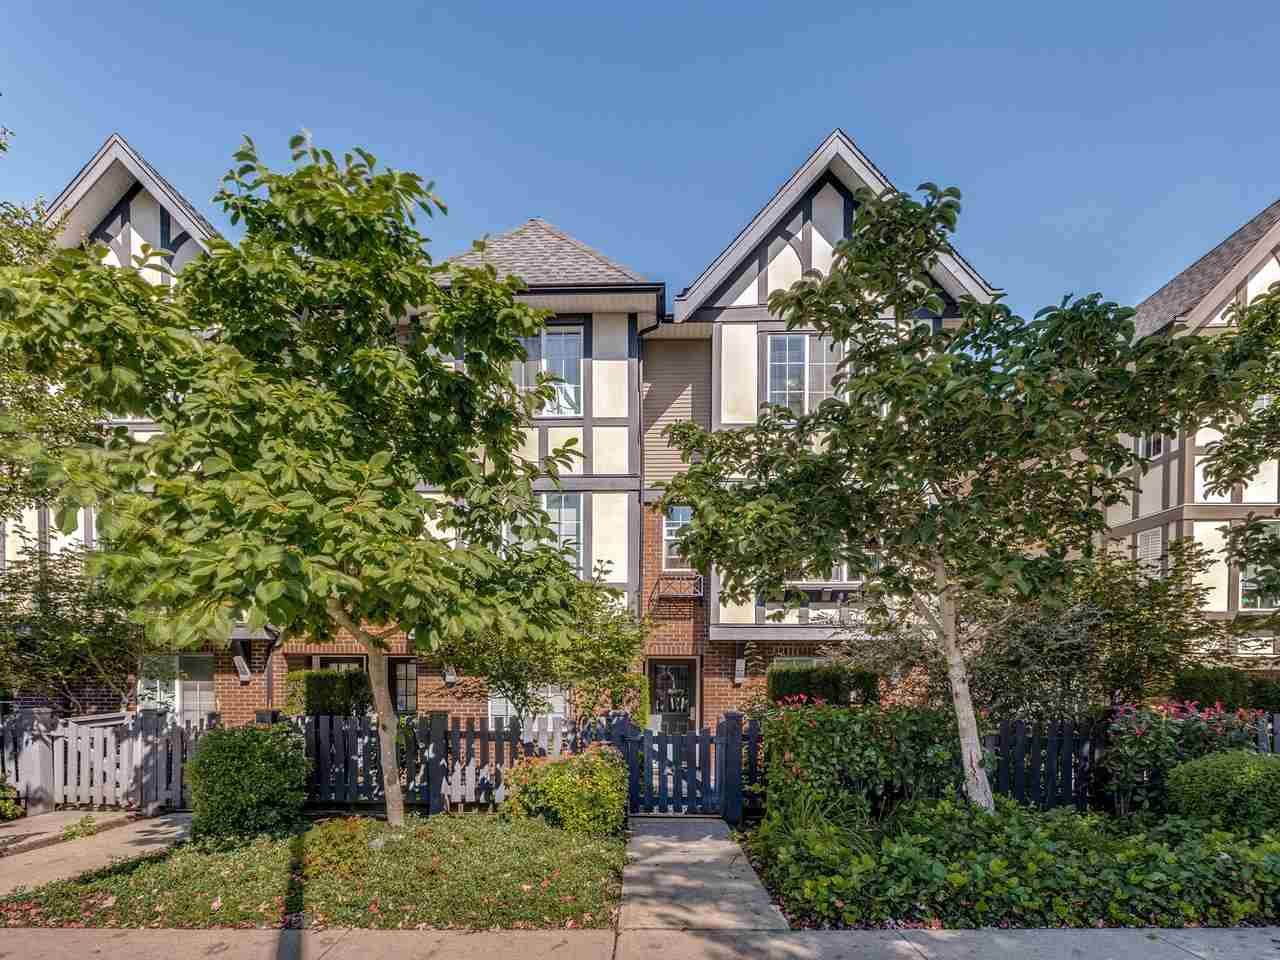 Main Photo: 27 20875 80 AVENUE in Langley: Willoughby Heights Townhouse for sale : MLS®# R2495219